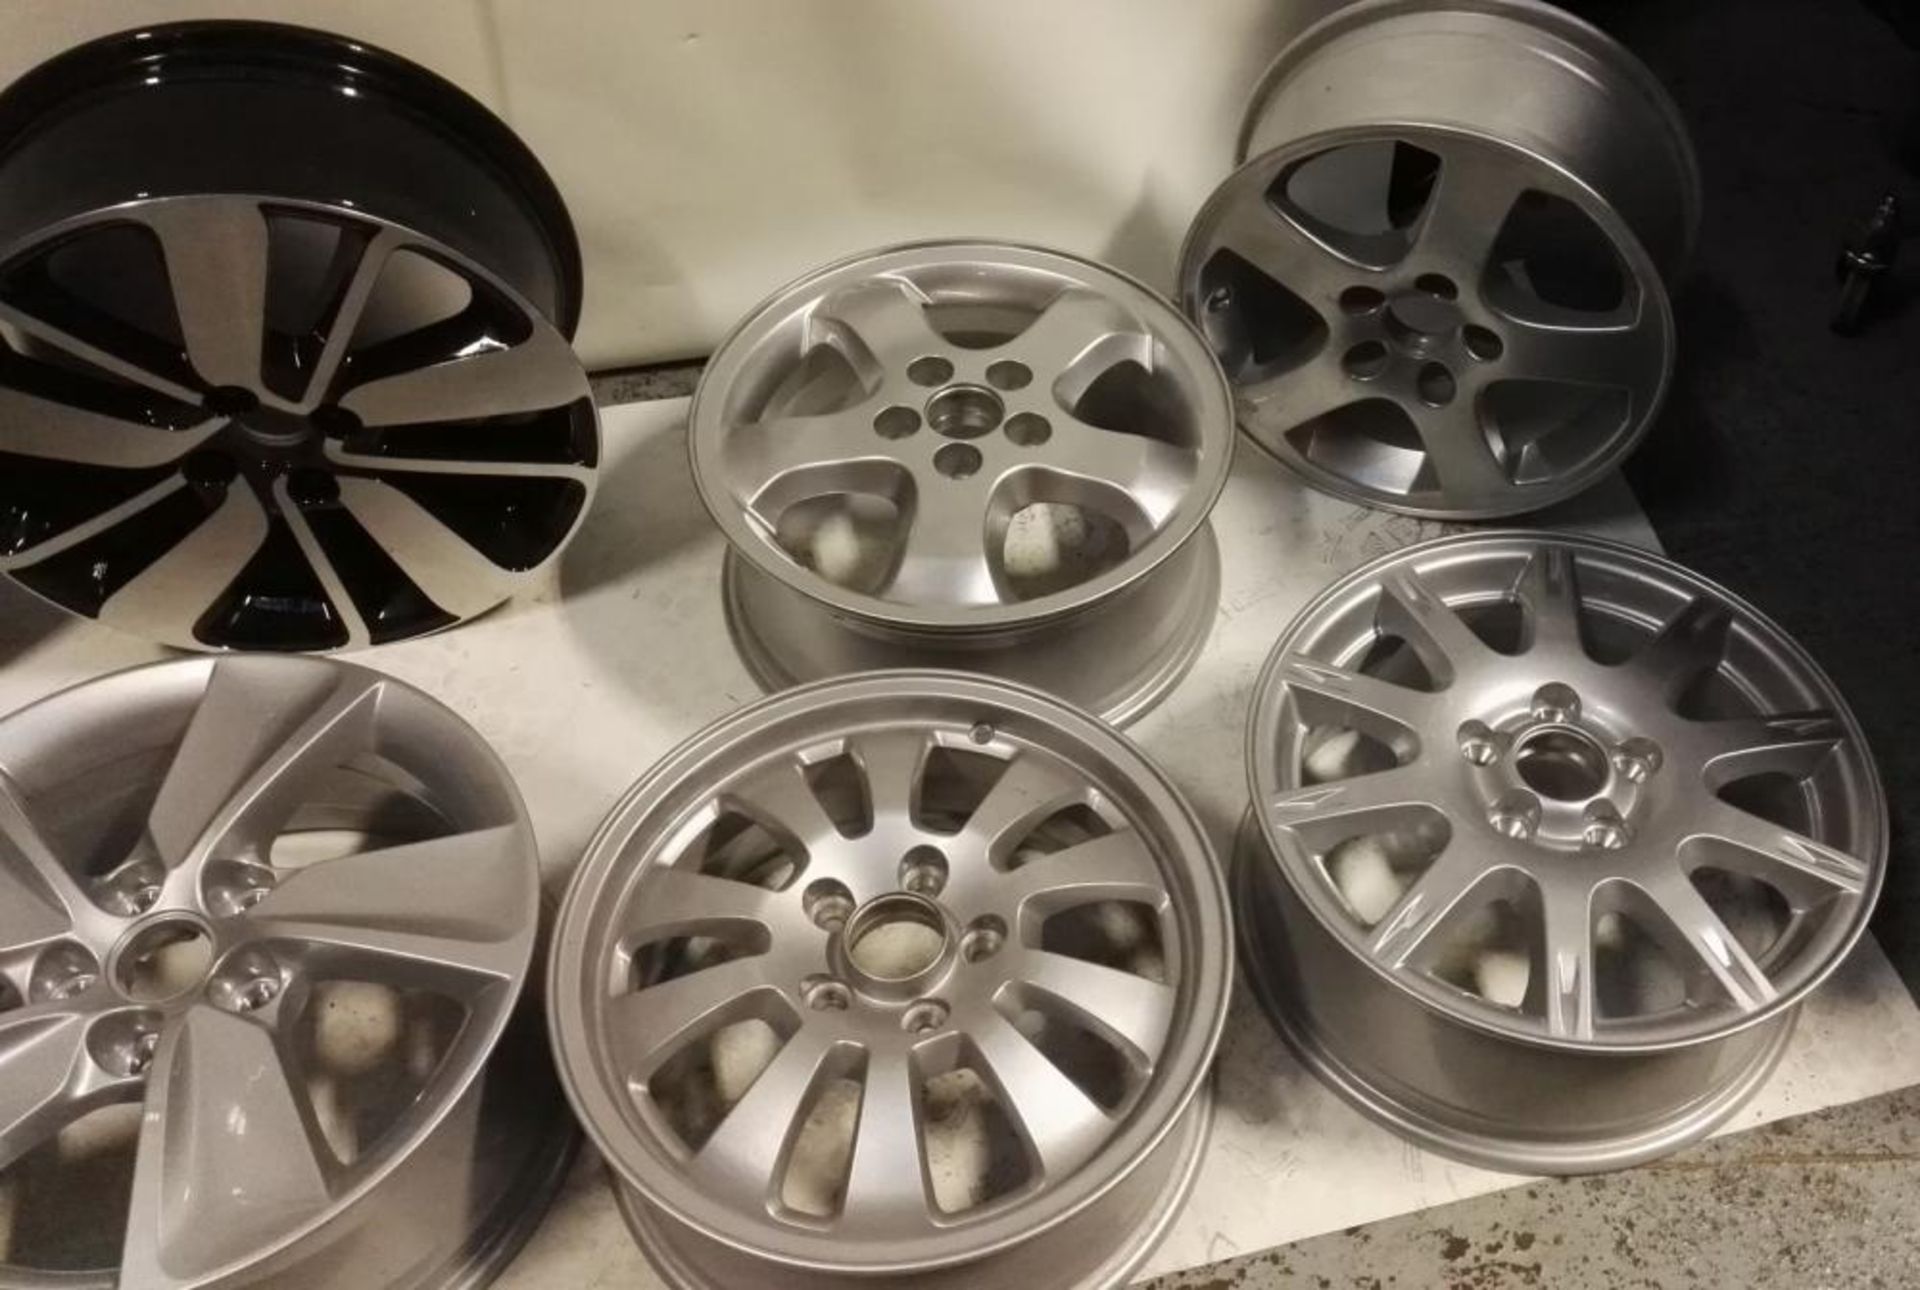 8 x Assorted Alloy Wheels - 15" to 17" - Saab, Opel, Vauxhall, Renault, BBS - CL084 - Location: Altr - Image 9 of 9